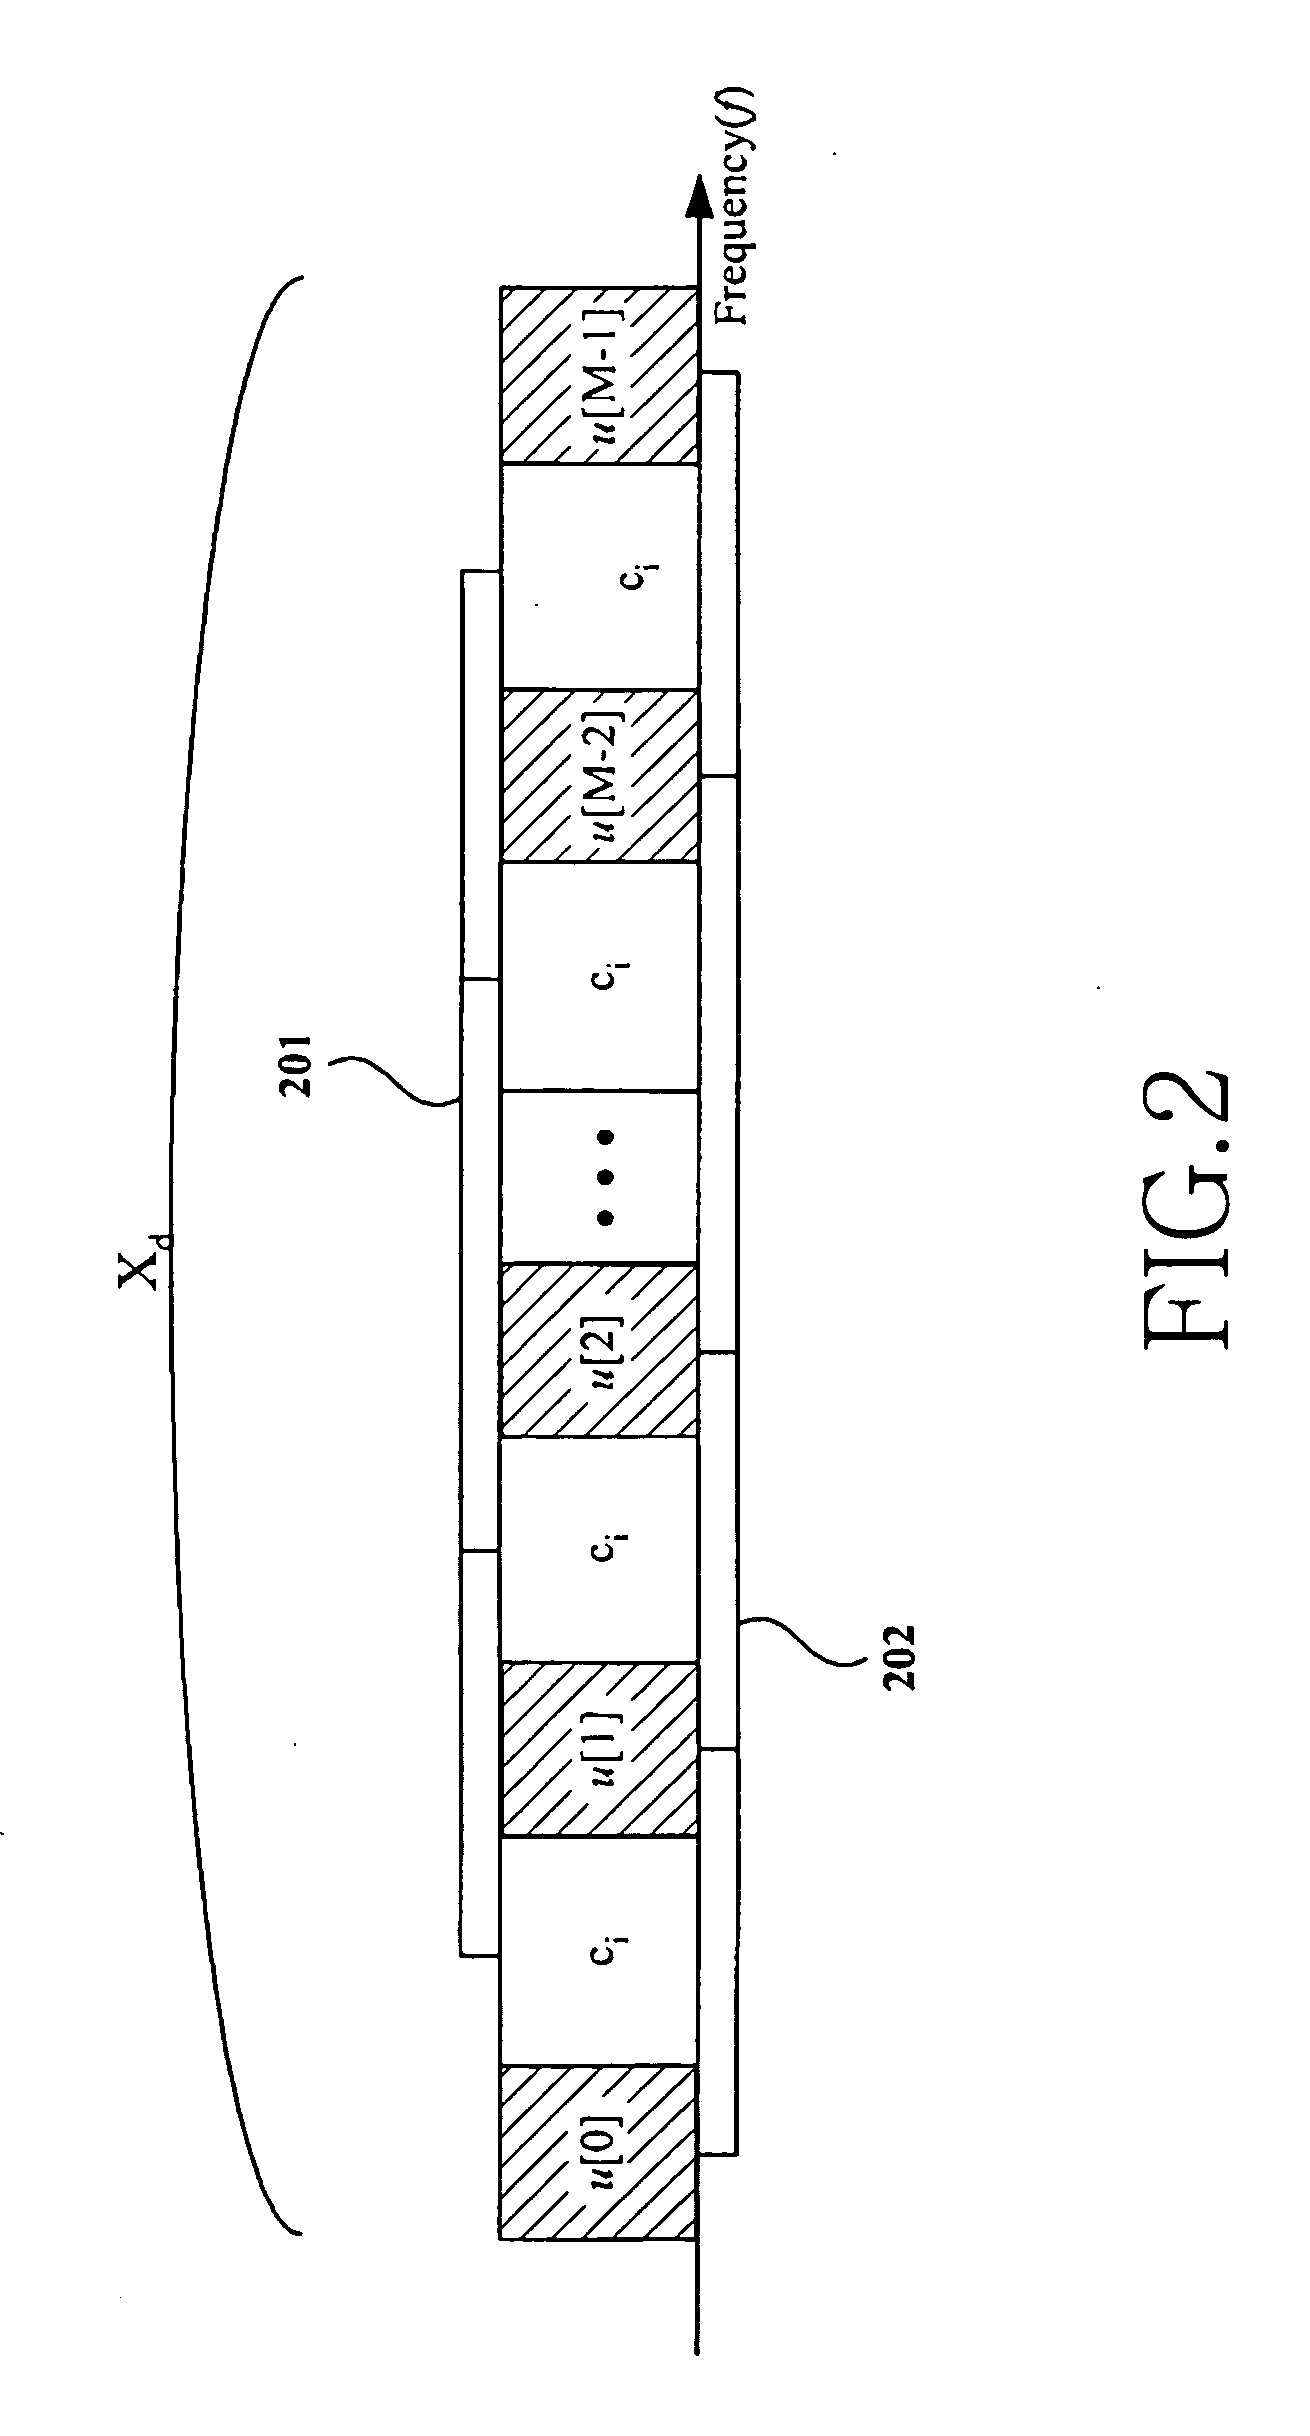 Method for designing an uplink pilot signal and a method and a system for estimating a channel in a multicarrier code division multiple access system